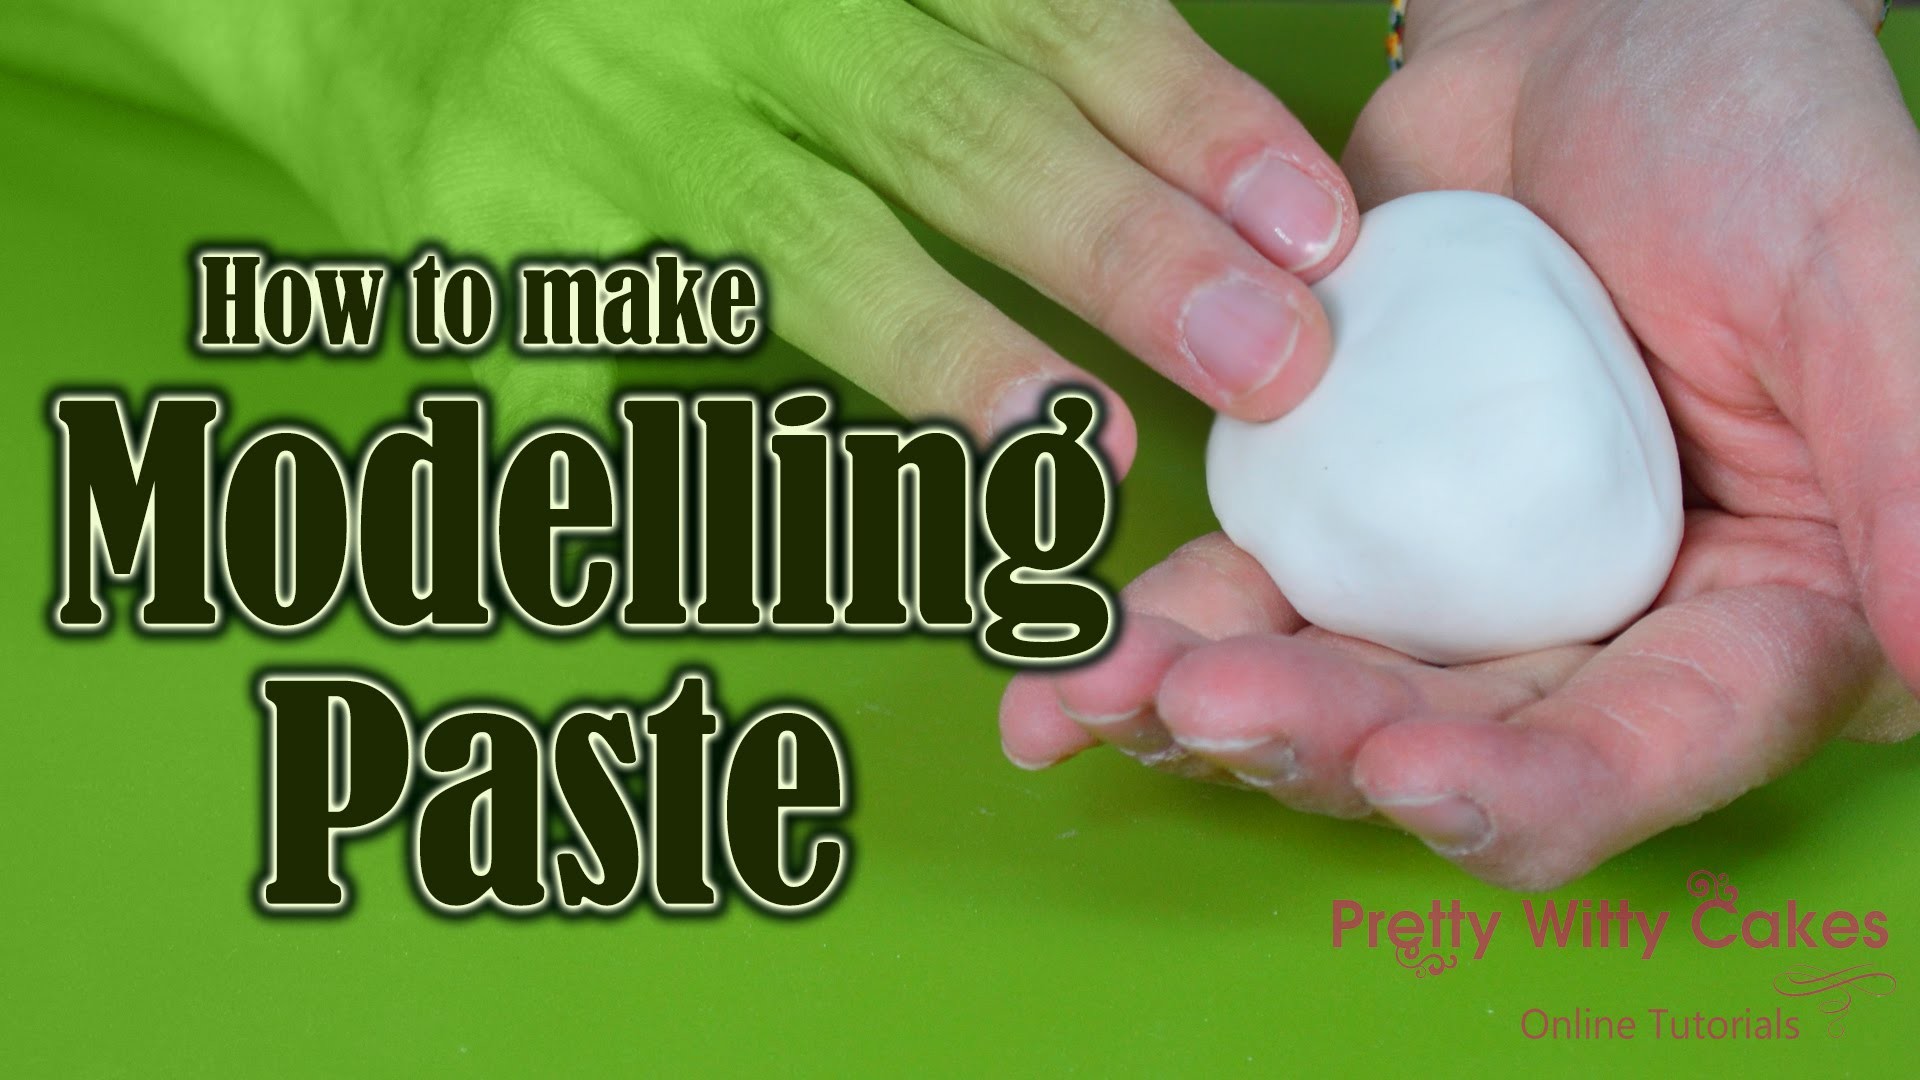 How to Make Modelling Paste - Pretty Witty Cakes